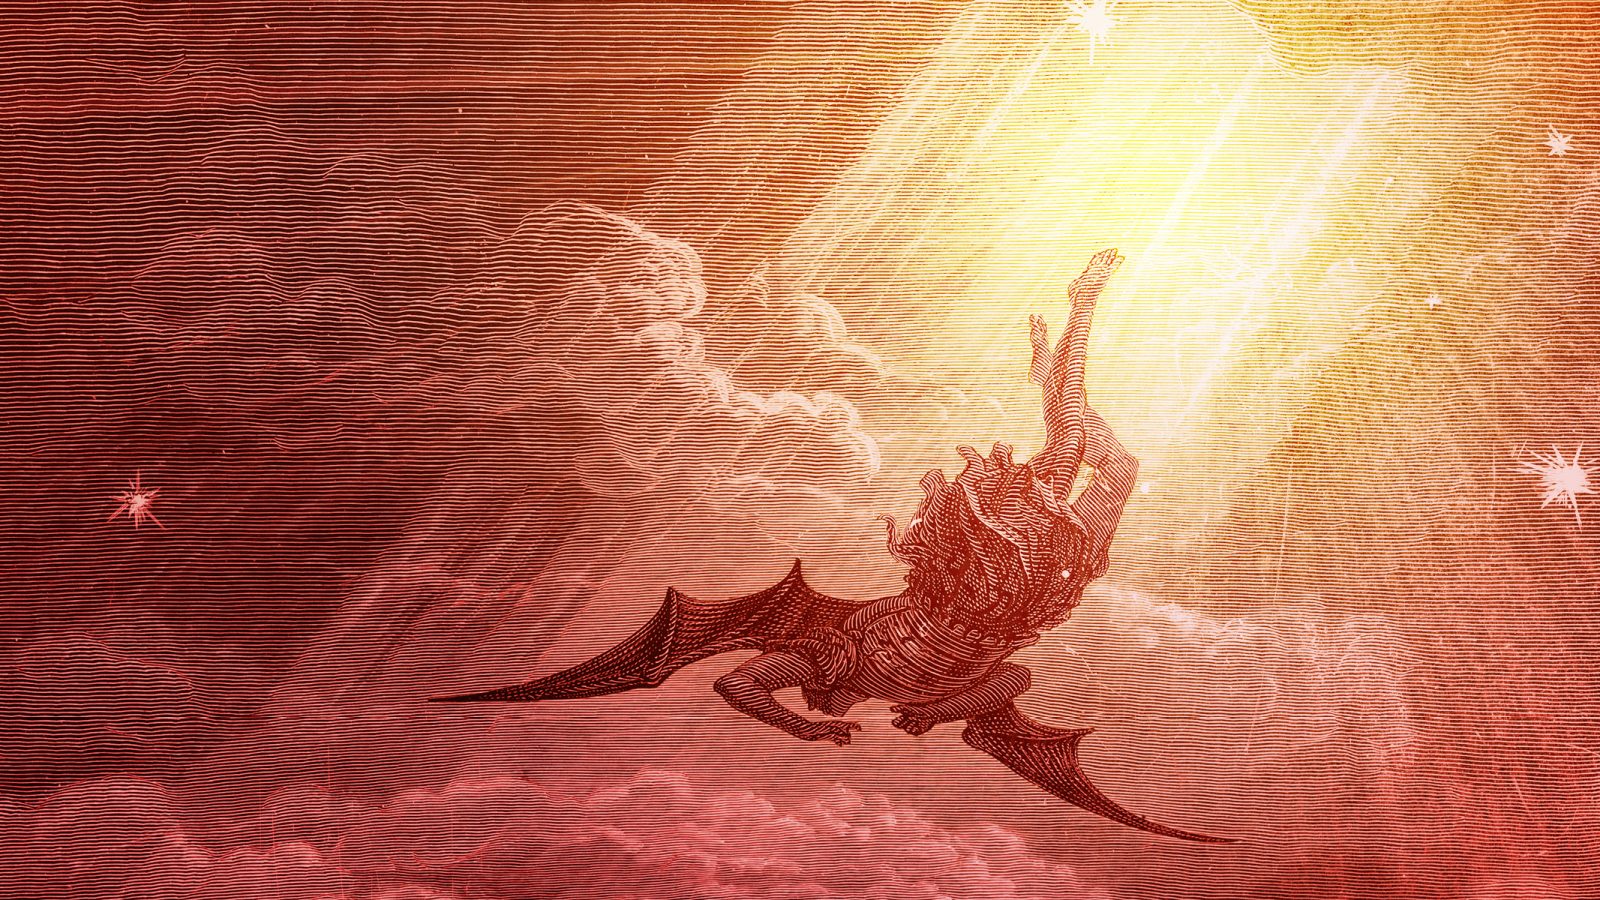 Satan falling with clouds and beams of light